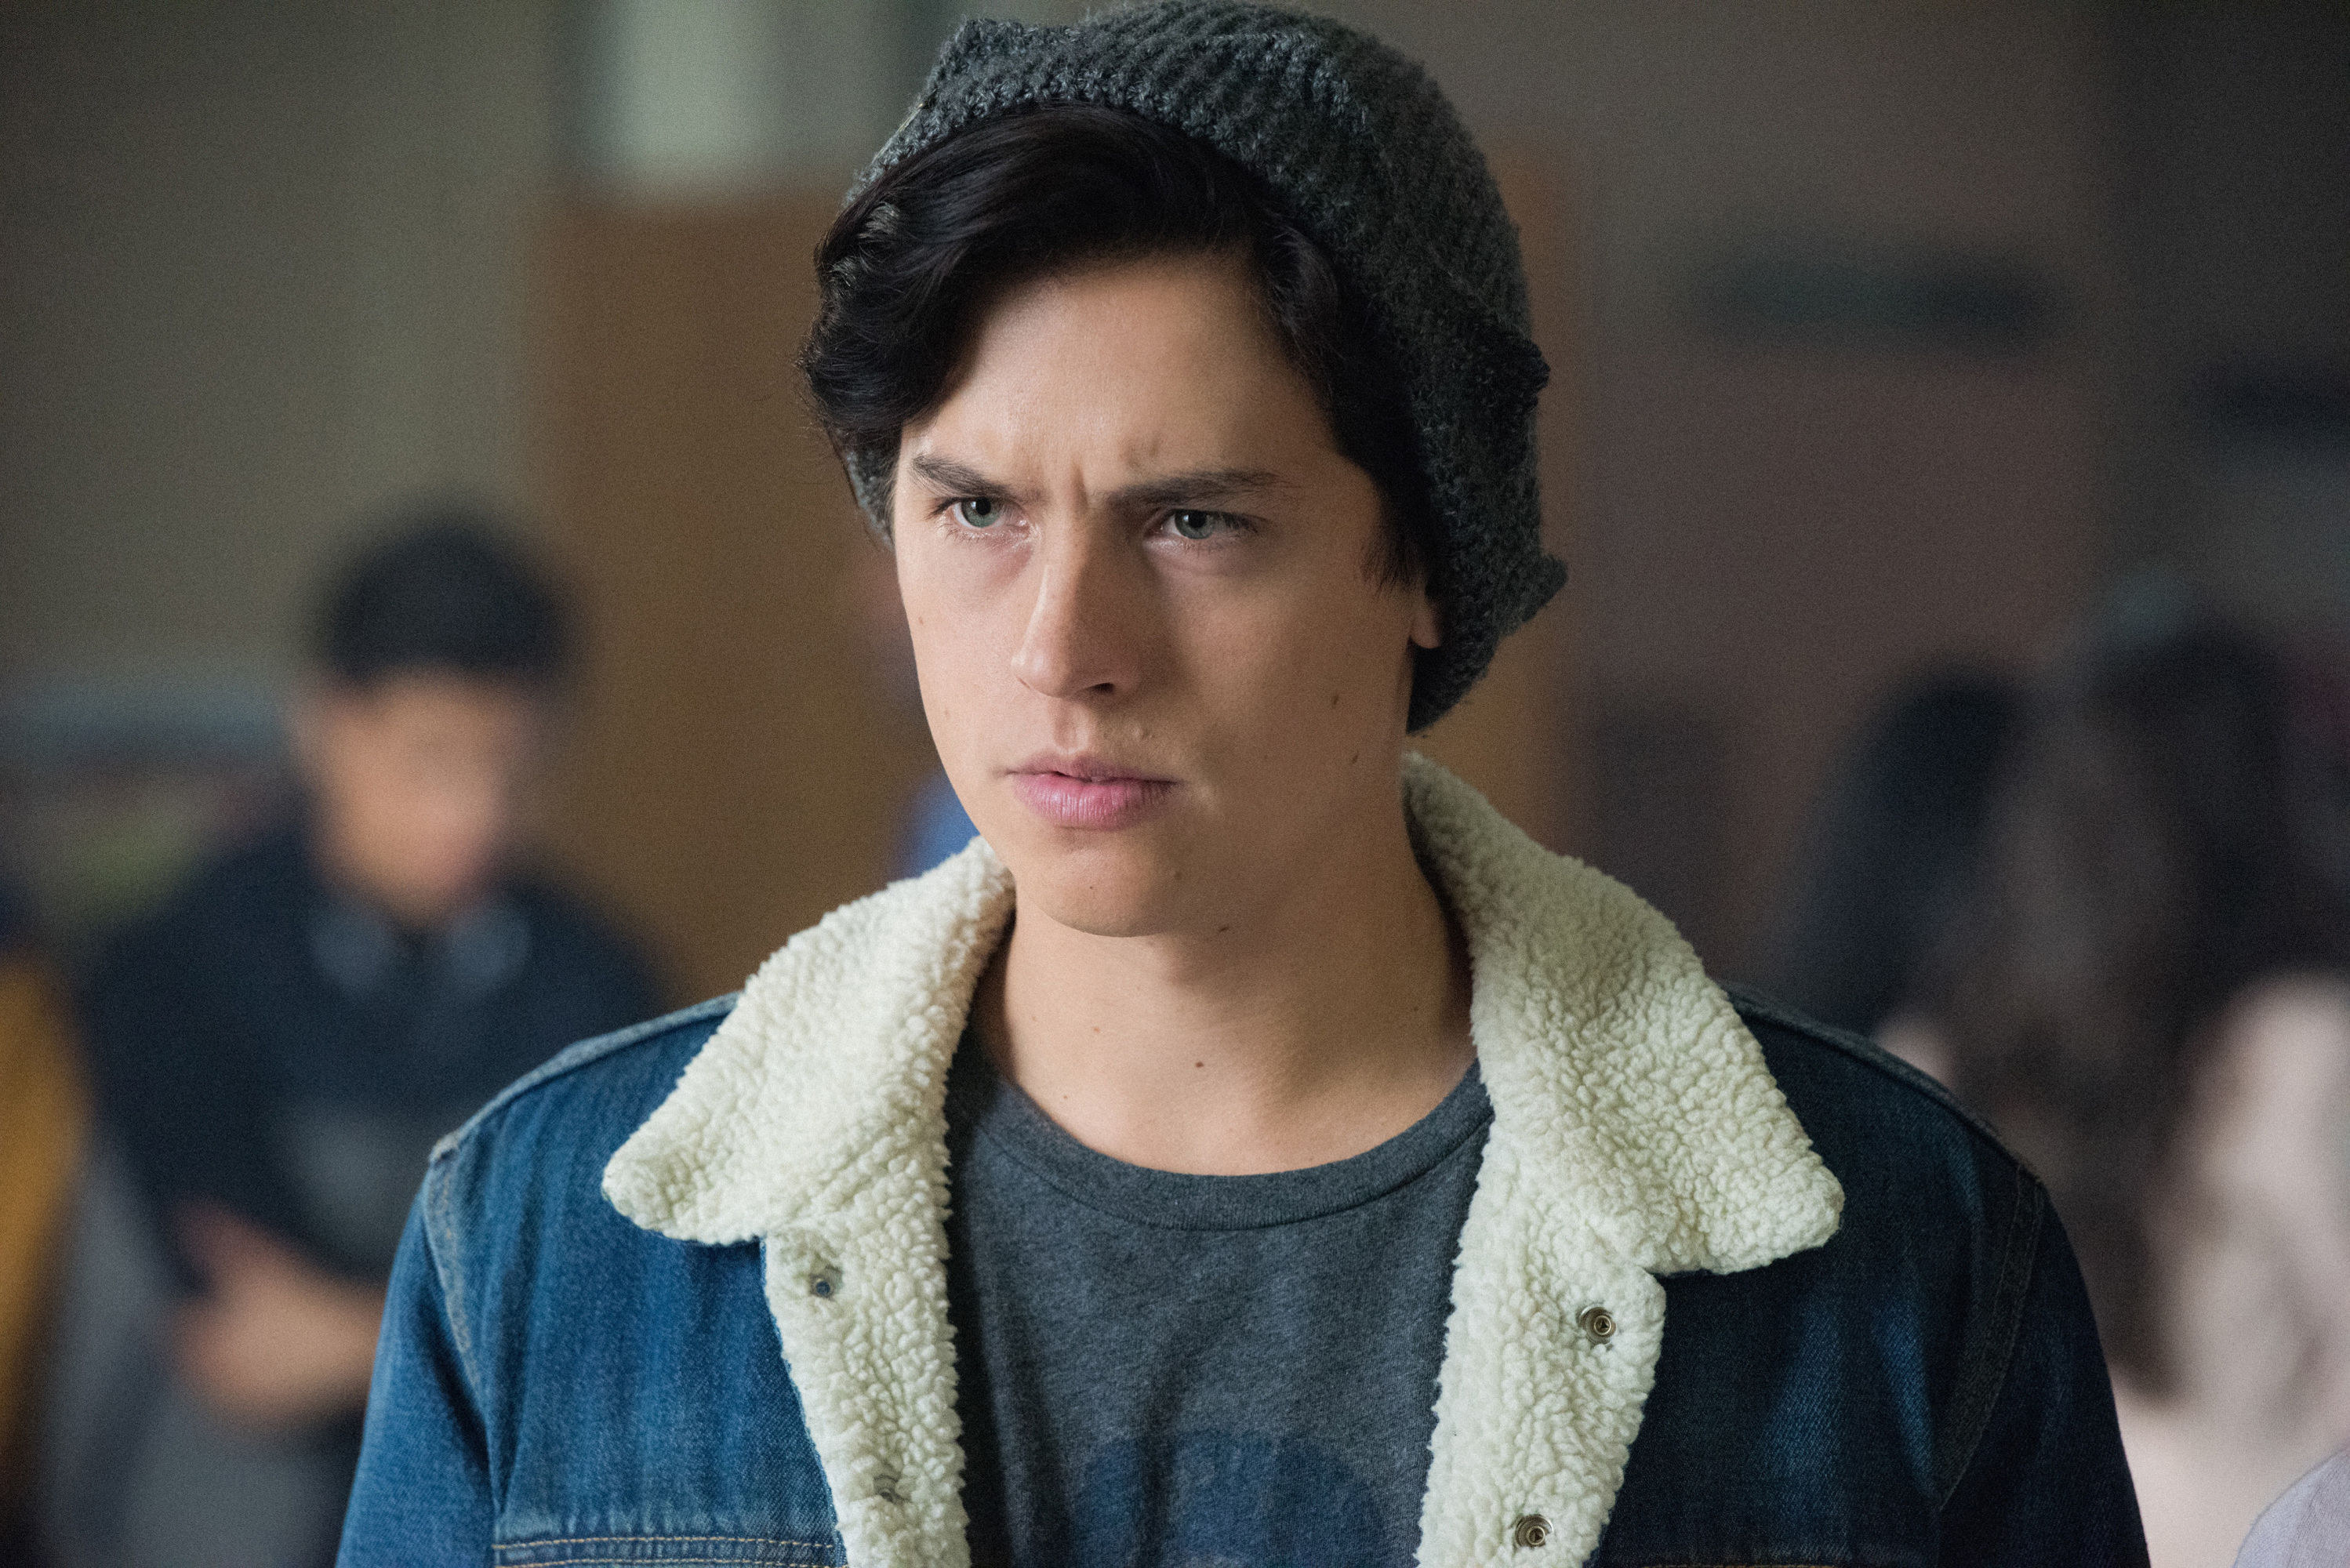 Cole Sprouse as Jughead